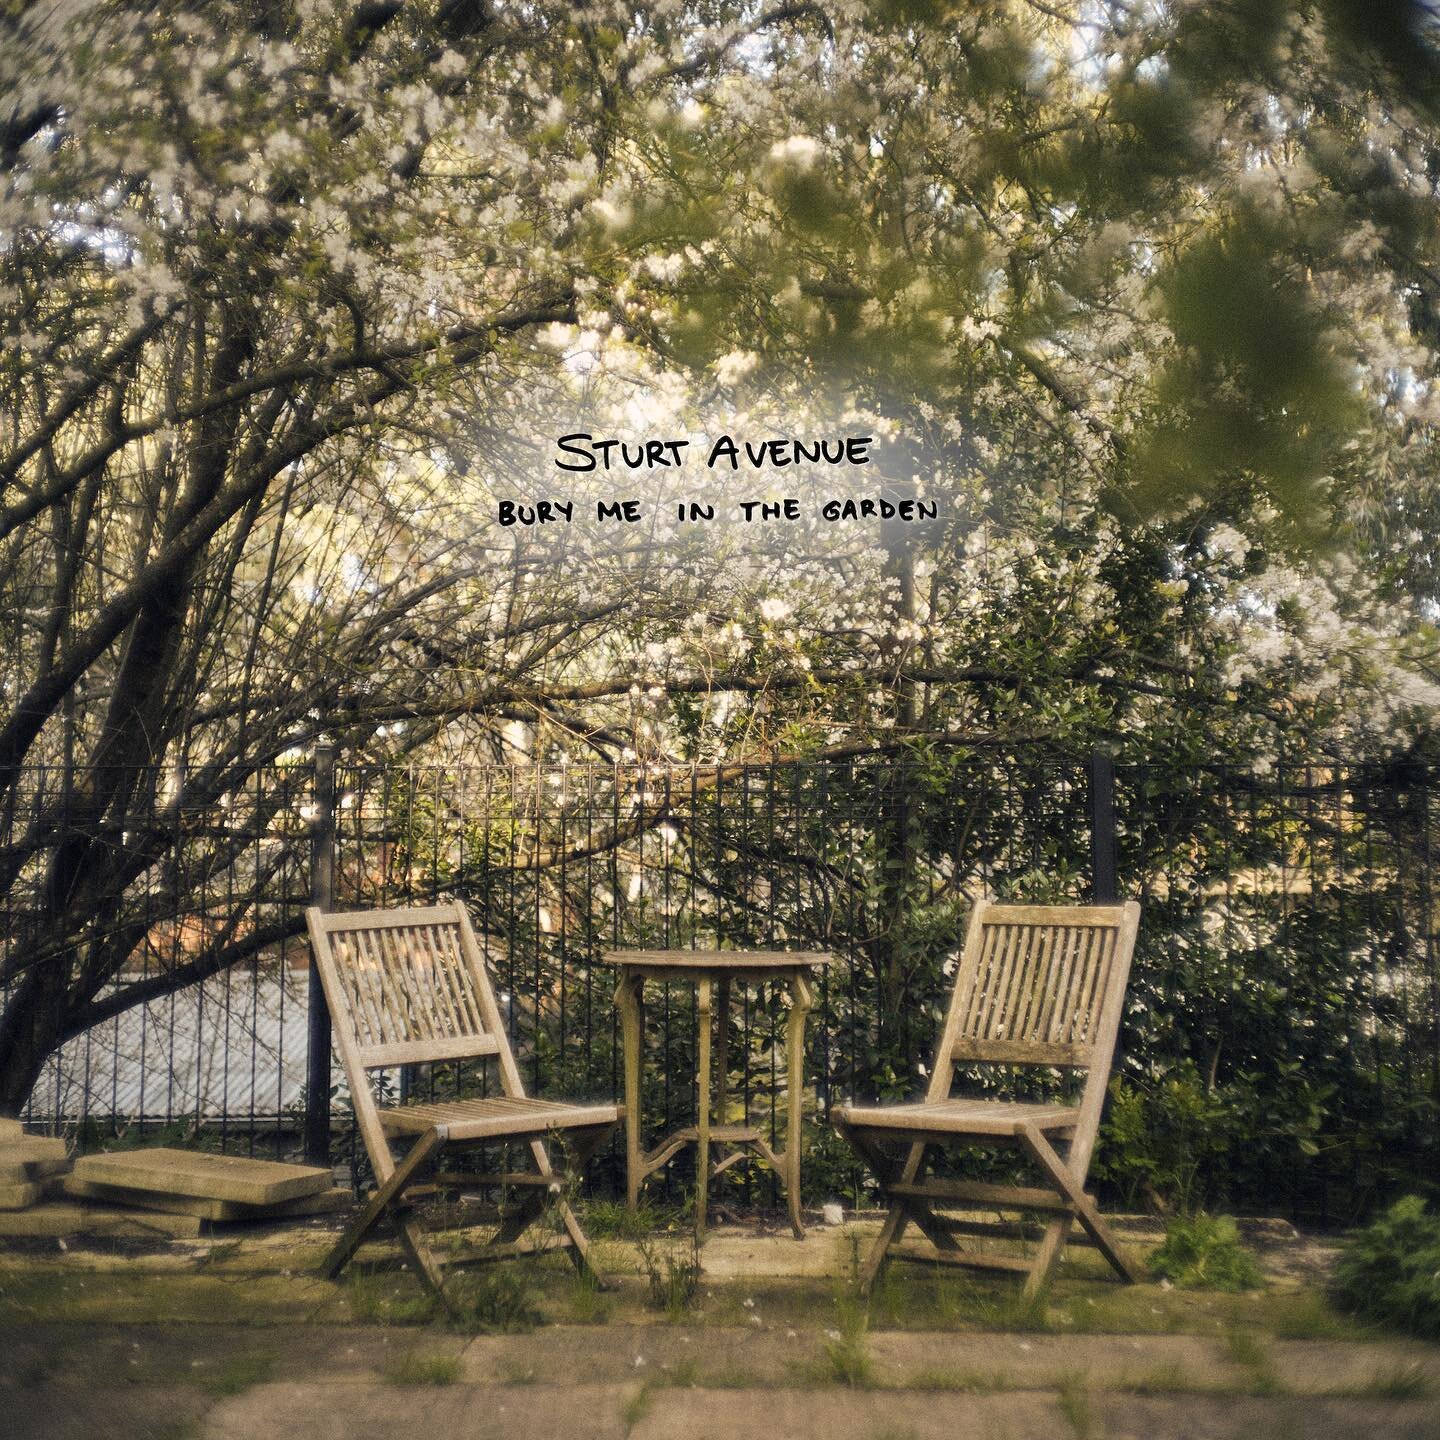 Happy release day @sturtavenue ! Their Album &lsquo;Bury Me in the Garden&rsquo; is out now! ✨🪴&thinsp;&thinsp;
&thinsp;&thinsp;
&lsquo;Bury Me in the Garden&rsquo; is a musical masterpiece that showcases Sturt Avenue&rsquo;s versatility. The album 